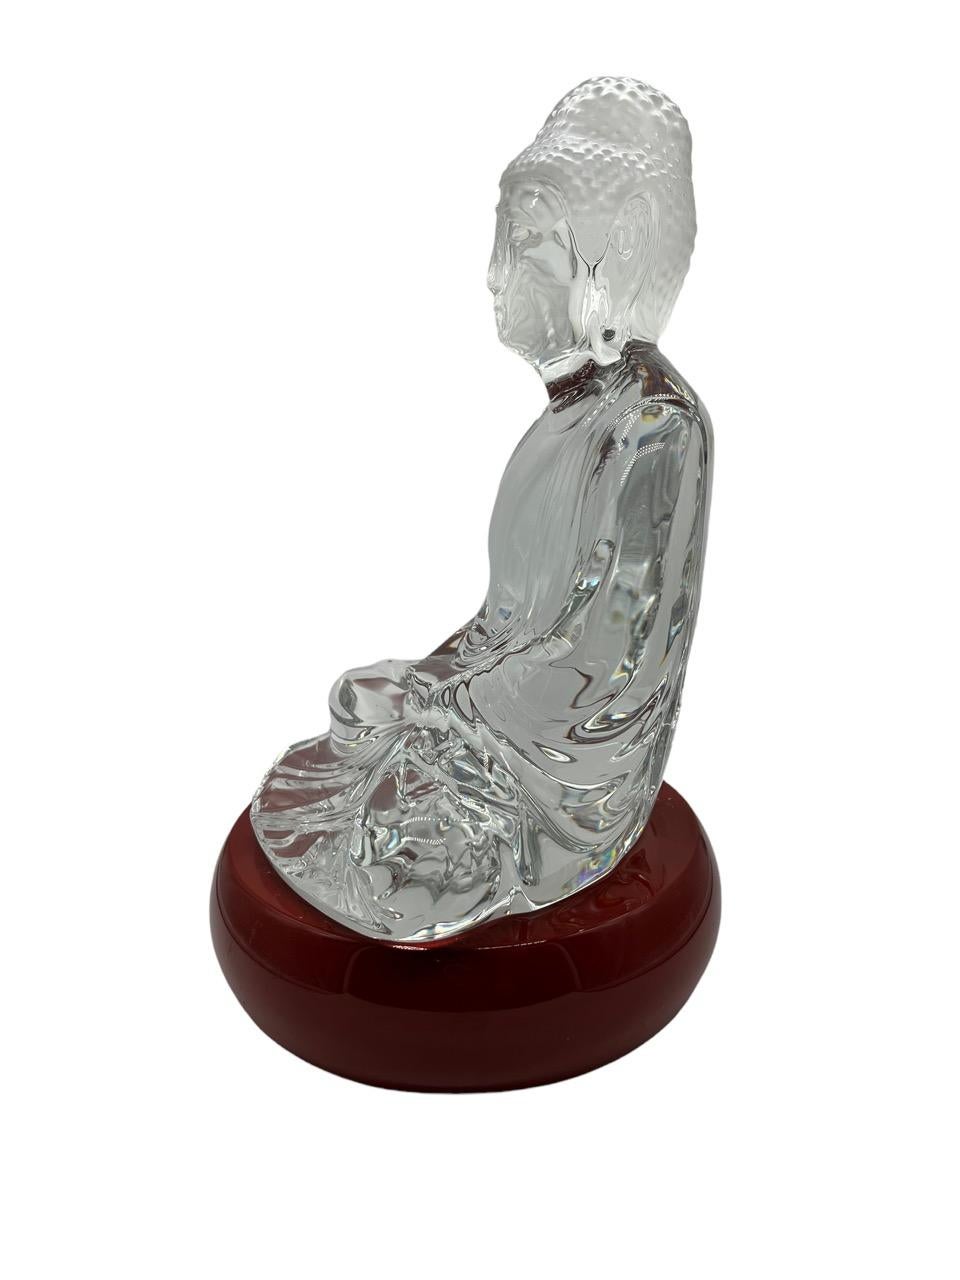 Baccarat Clear Crystal Buddah Figurine Designed by Kenzo Takada In Fair Condition For Sale In North Miami, FL